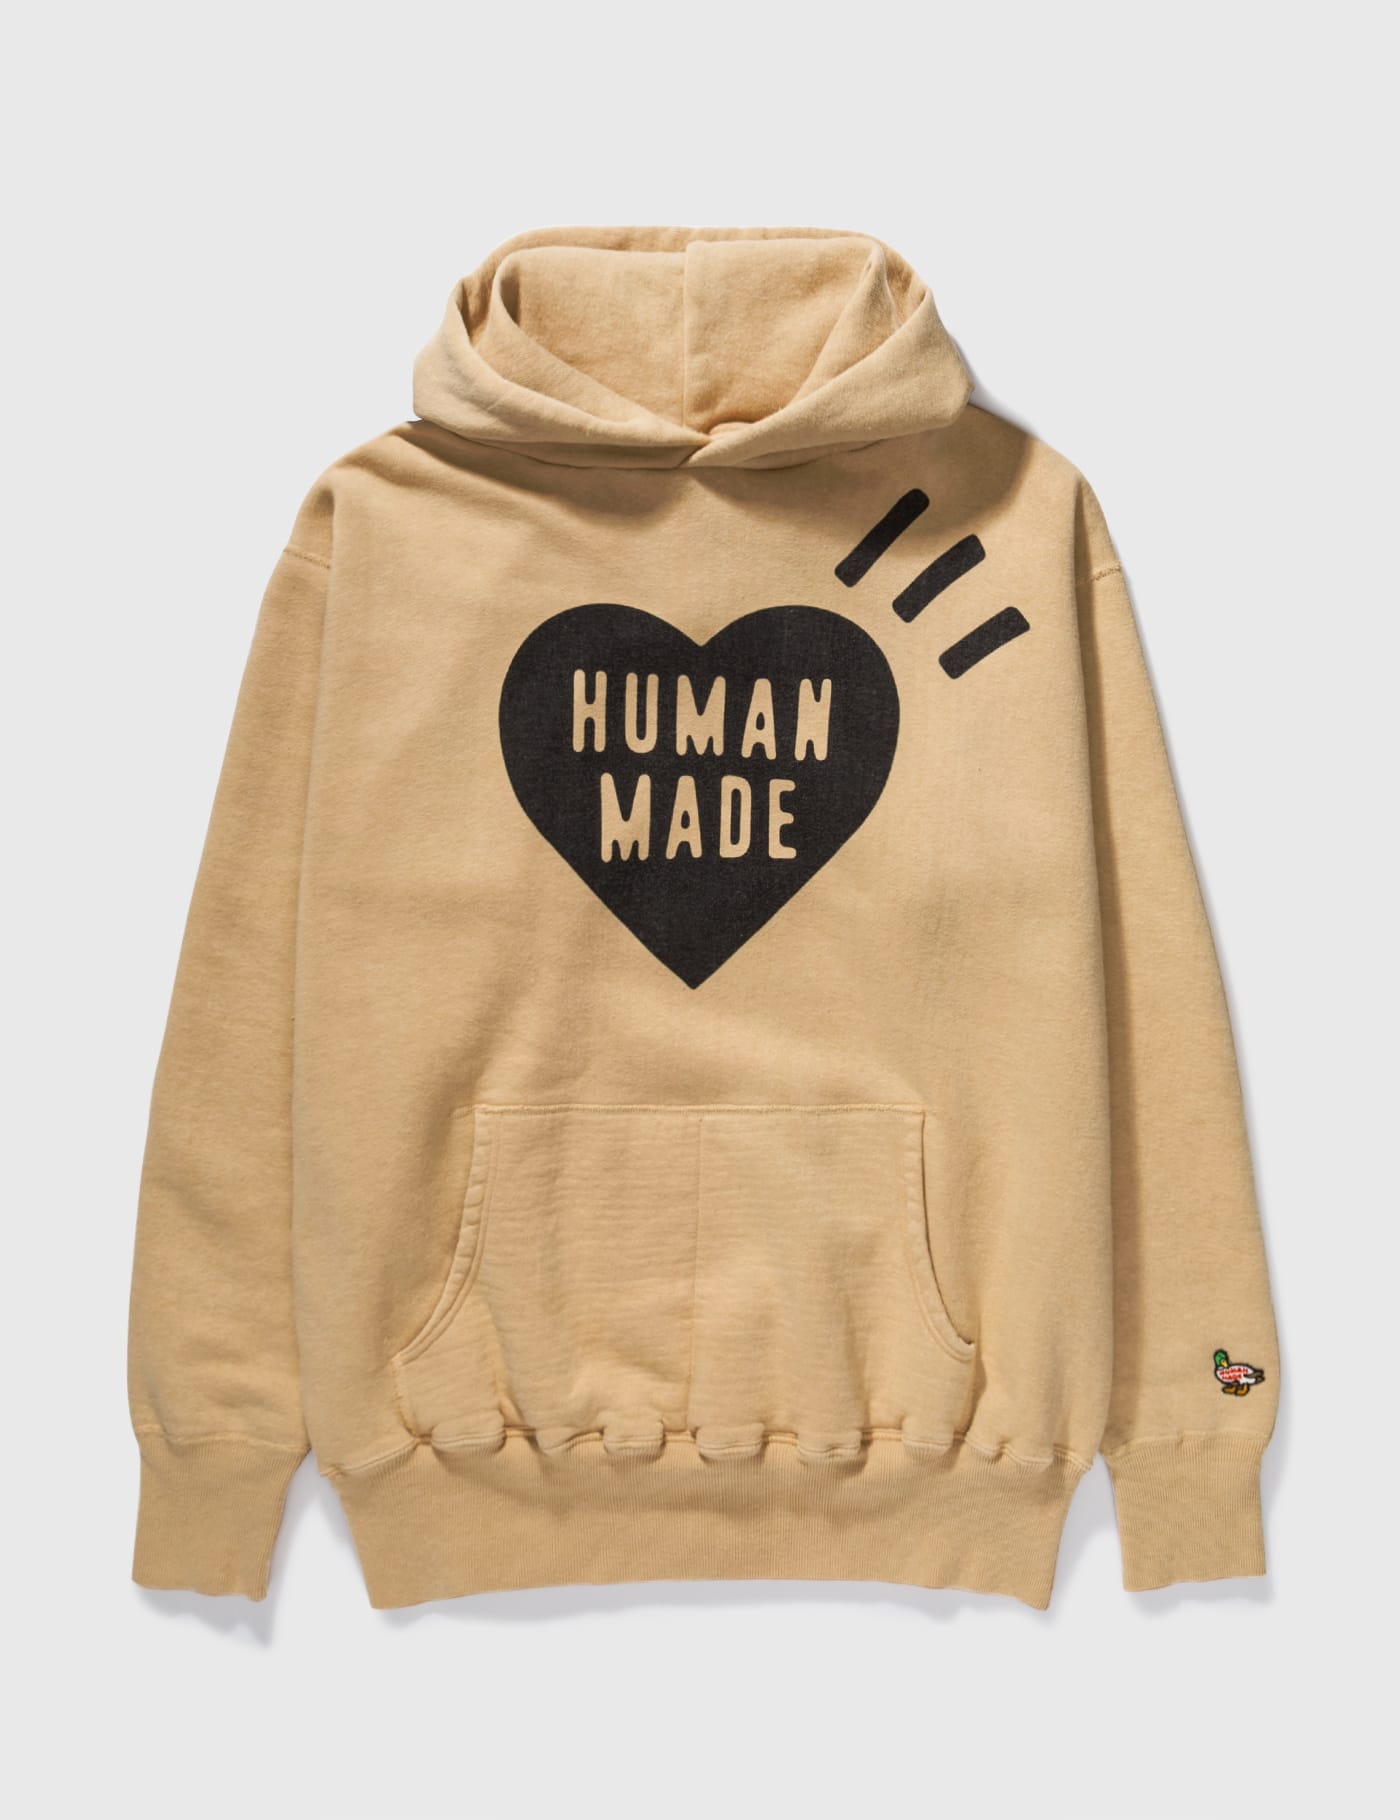 Human Made - Heart Hoodie | HBX - Globally Curated Fashion and 